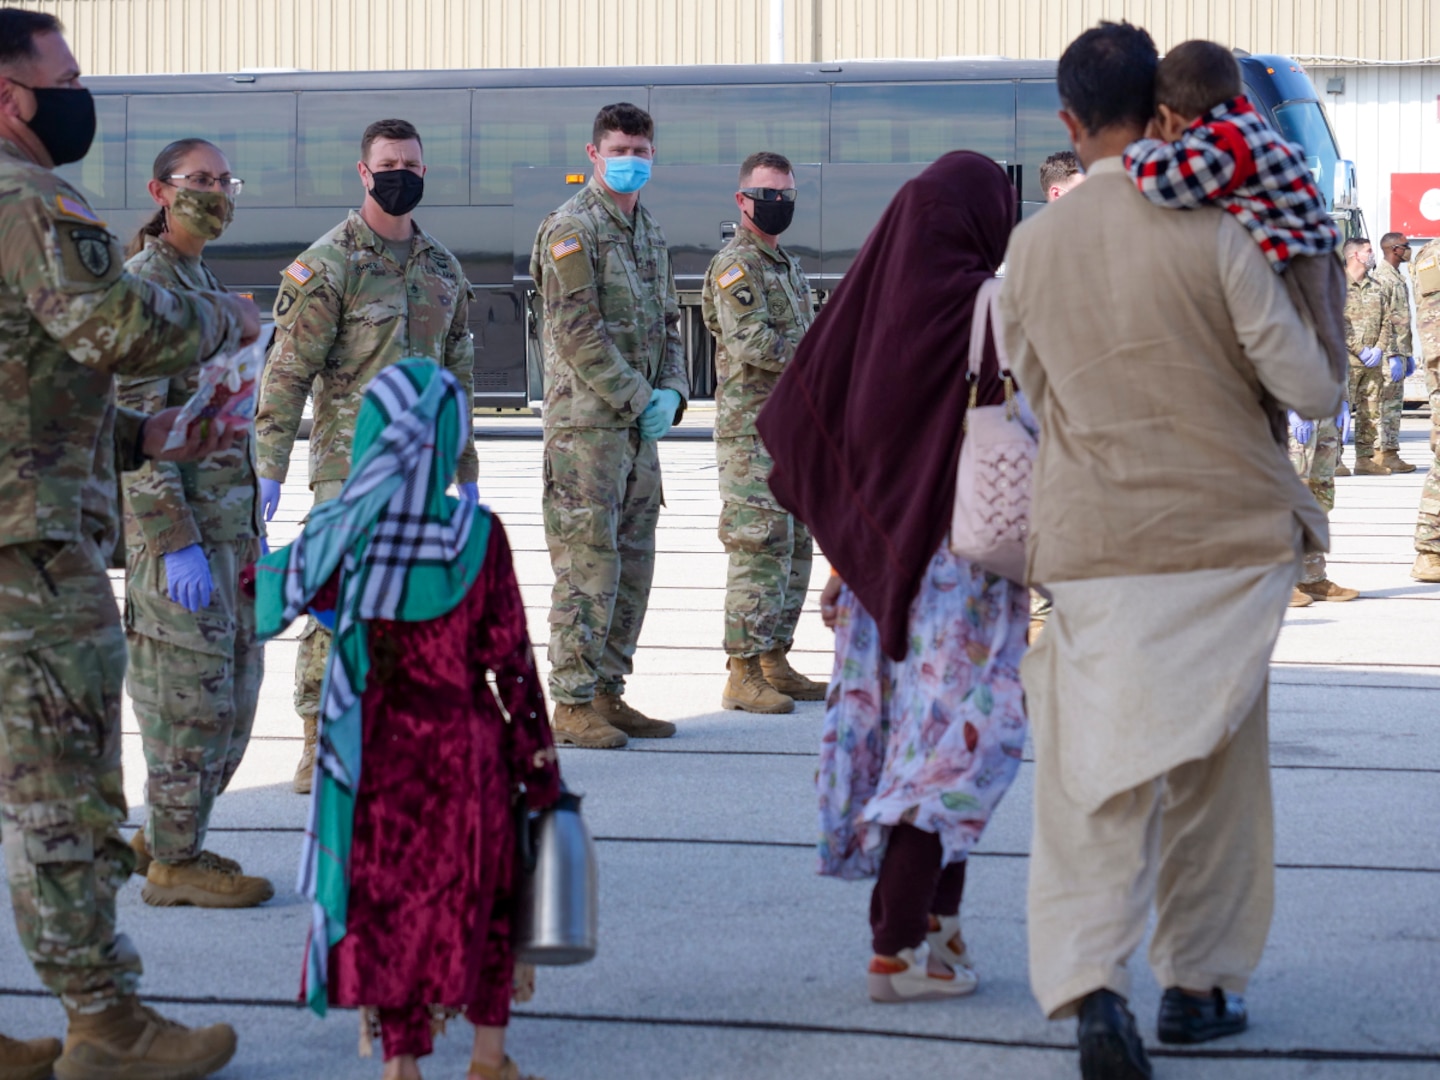 Afghan evacuees arrive in Indianapolis Sept. 2, 2021, as 1st Cavalry Division Soldiers watch. Hoosiers will host the Afghans at Camp Atterbury, near Edinburgh, as they begin their safe resettlement to the United States. The division Soldiers along with Indiana National Guard Soldiers will provide transportation, temporary housing, medical screening and logistics support as part of Operation Allies Welcome.